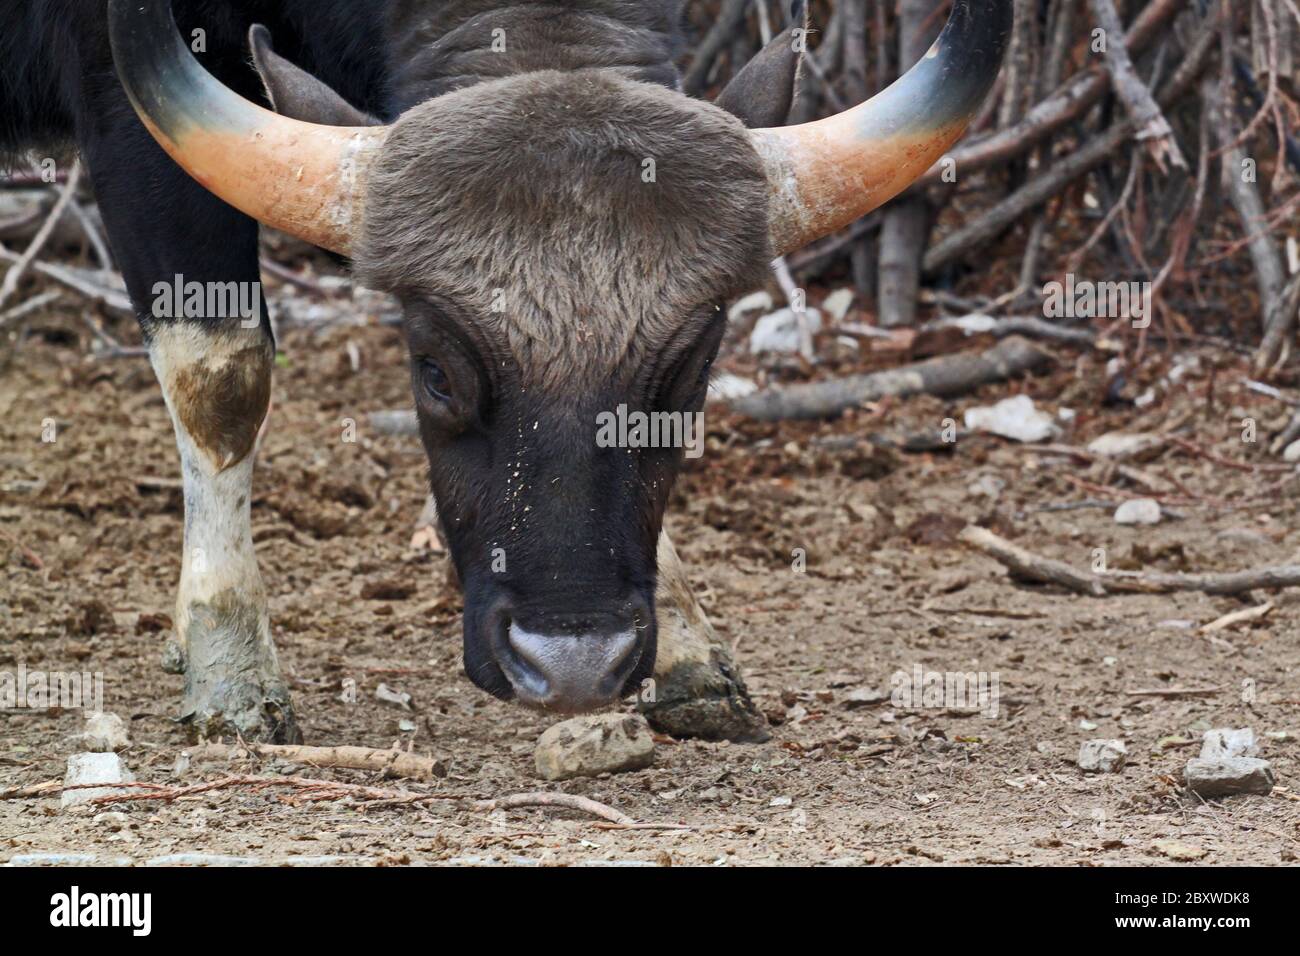 Bos gaurus. The gaur is the largest bovine and is native to South Asia and Southeast Asia. Stock Photo